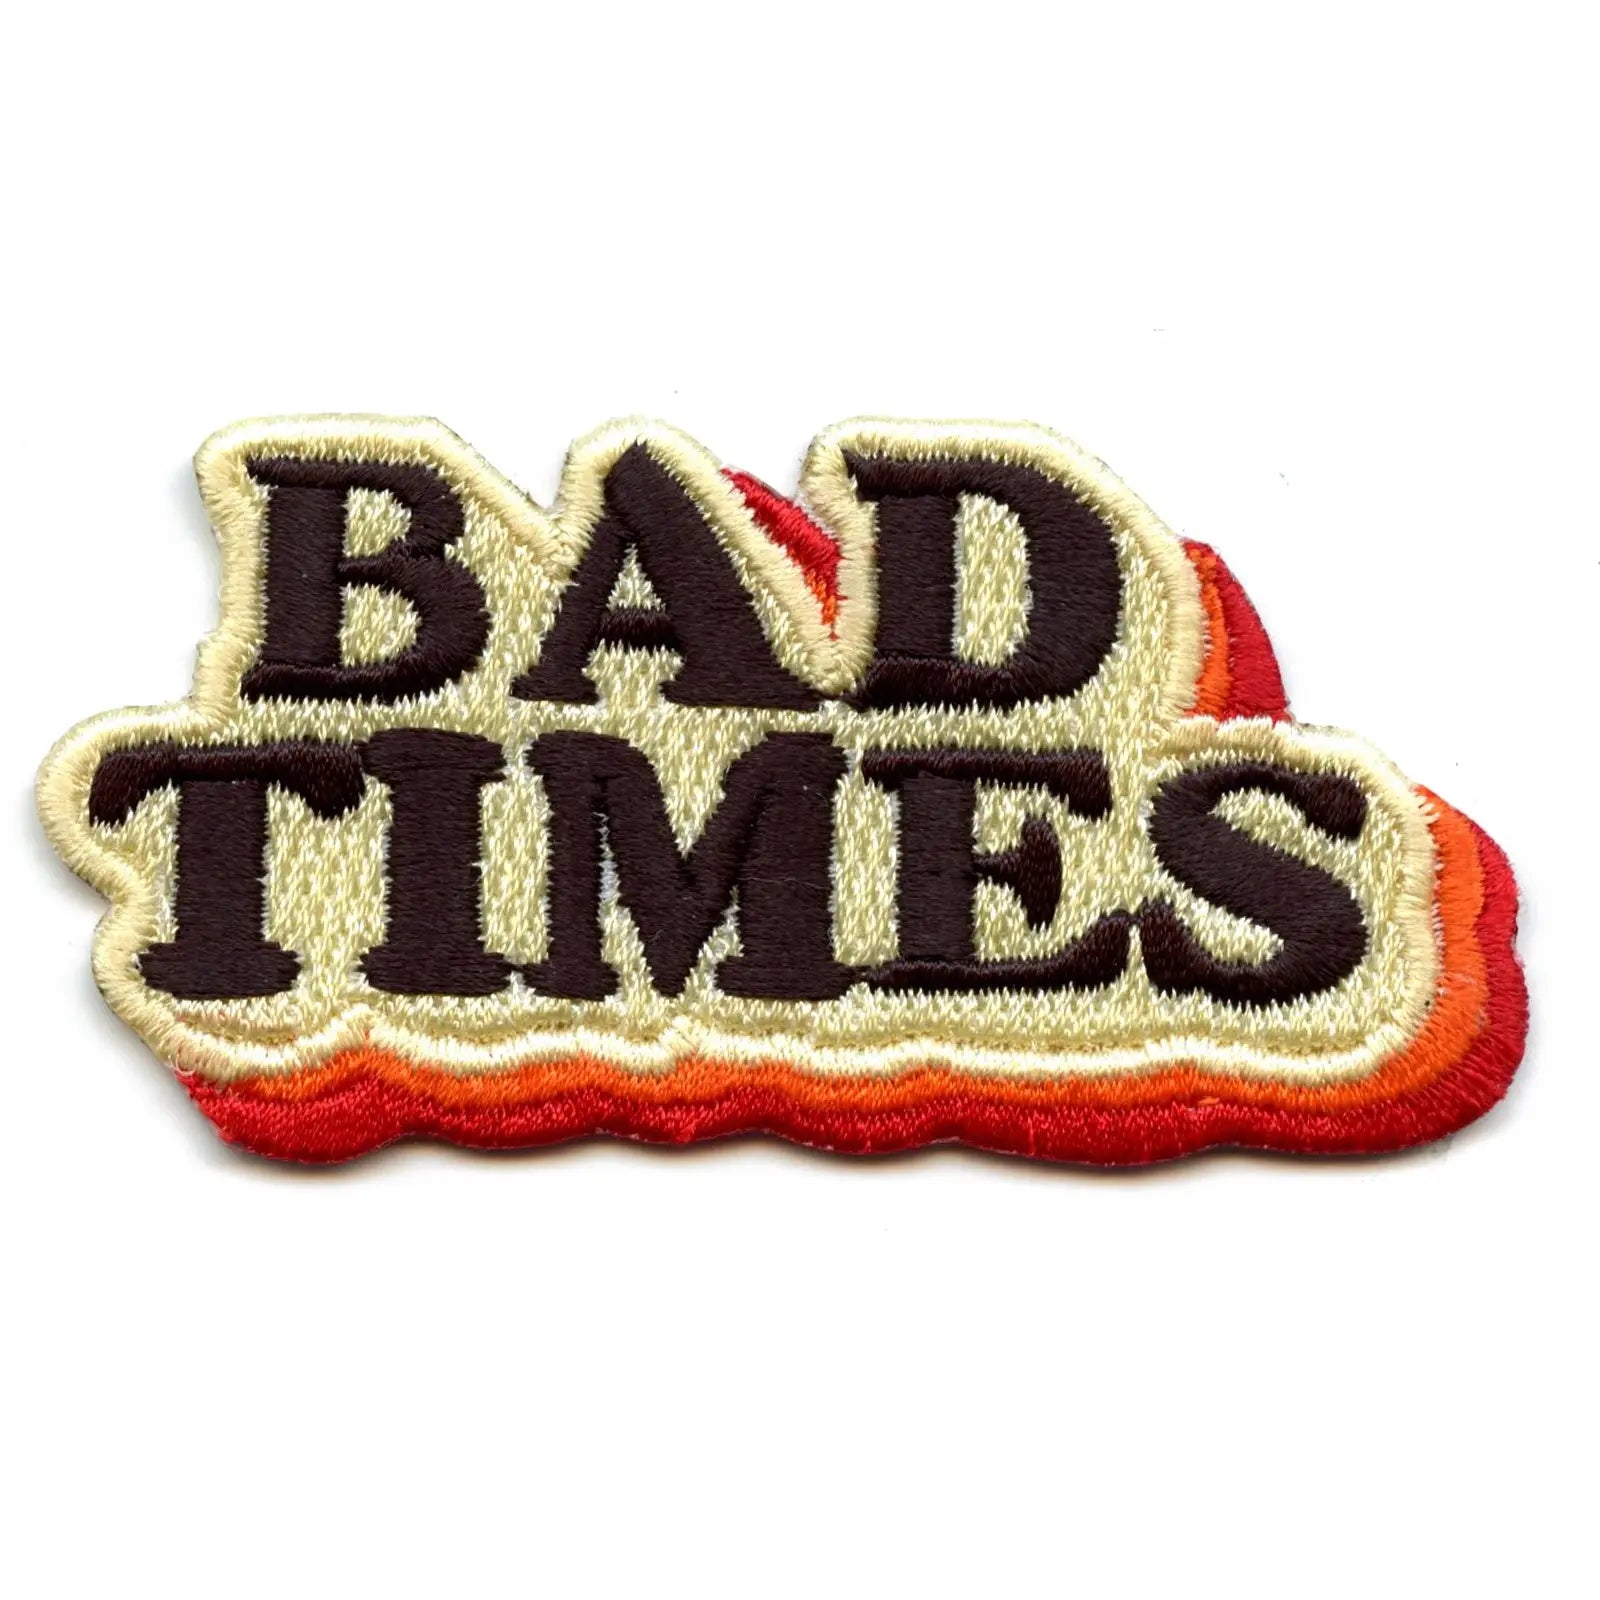 Retro Script Bad Times Embroidered Iron On Patch 